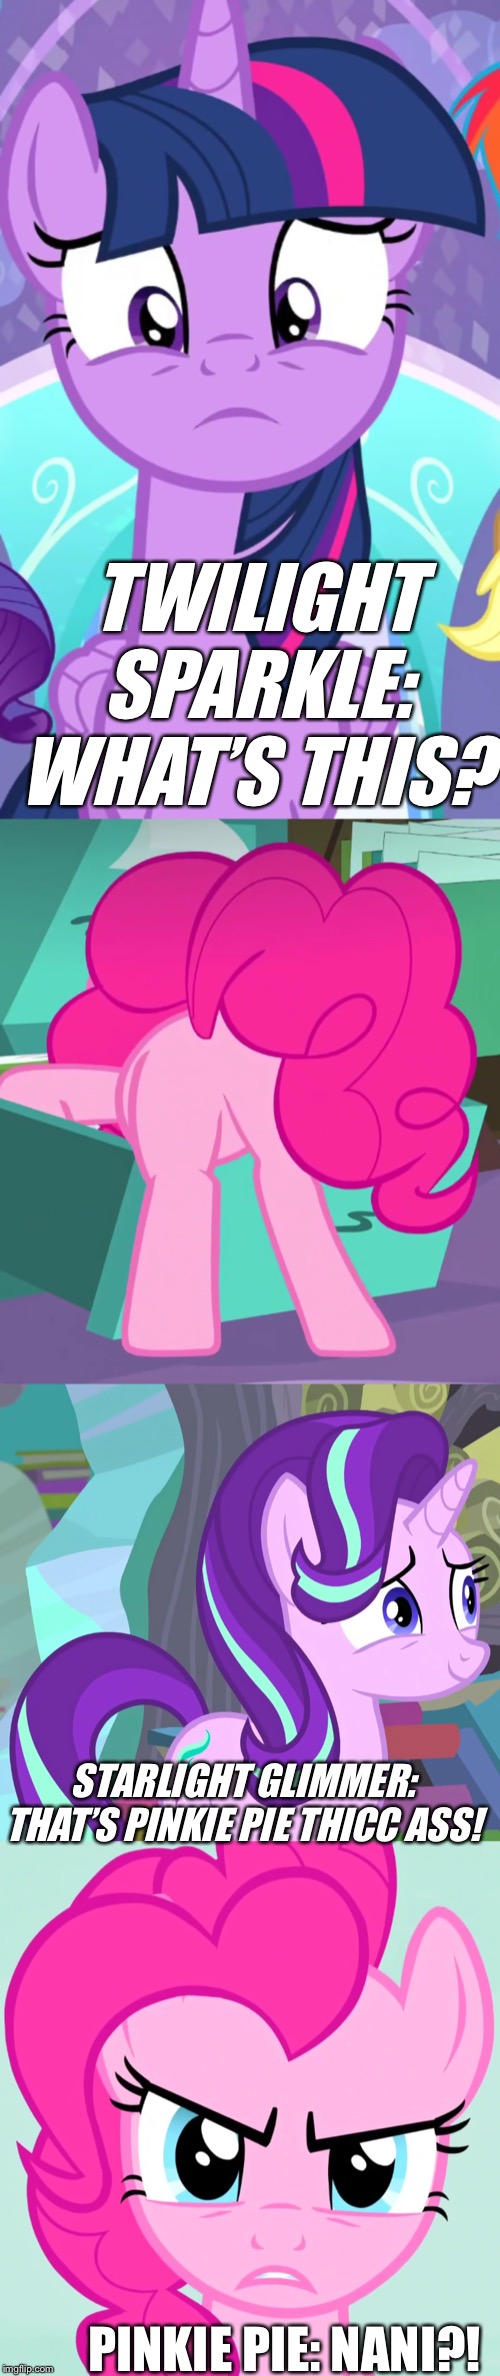 Pinkie Pie’s Thicc Ass | TWILIGHT SPARKLE: WHAT’S THIS? STARLIGHT GLIMMER: THAT’S PINKIE PIE THICC ASS! PINKIE PIE: NANI?! | image tagged in starlight glimmer,thicc,dat ass,pinkie pie,twilight sparkle,mlp fim | made w/ Imgflip meme maker